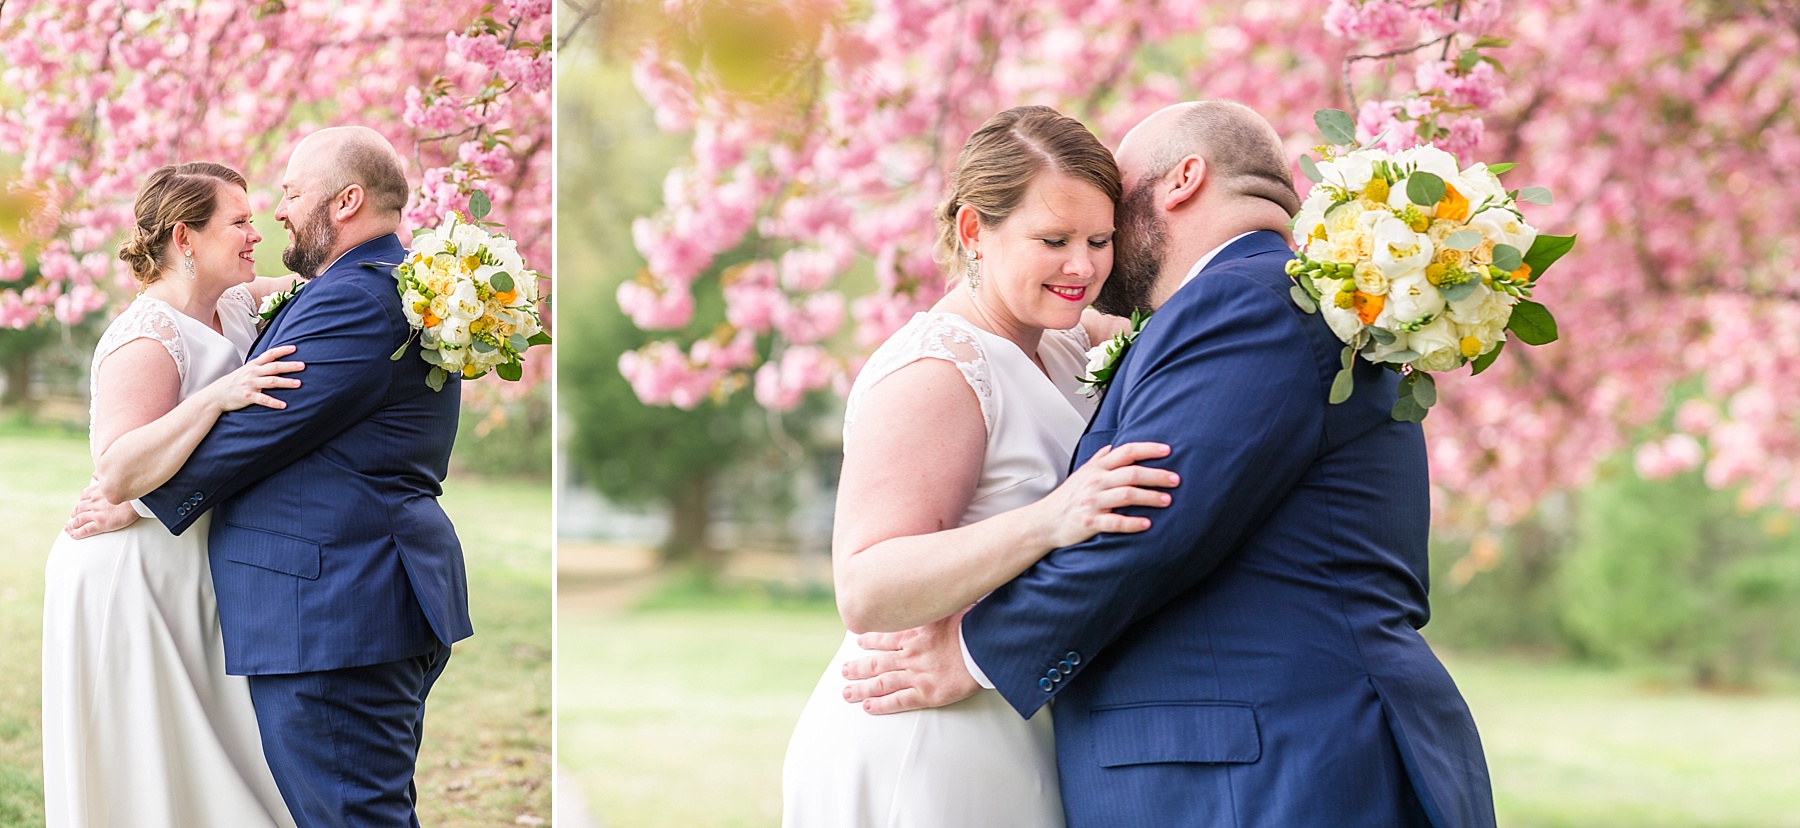 wedding portraits at Woodlawn + Pope Leighy House with Alexandra Mandato Photography